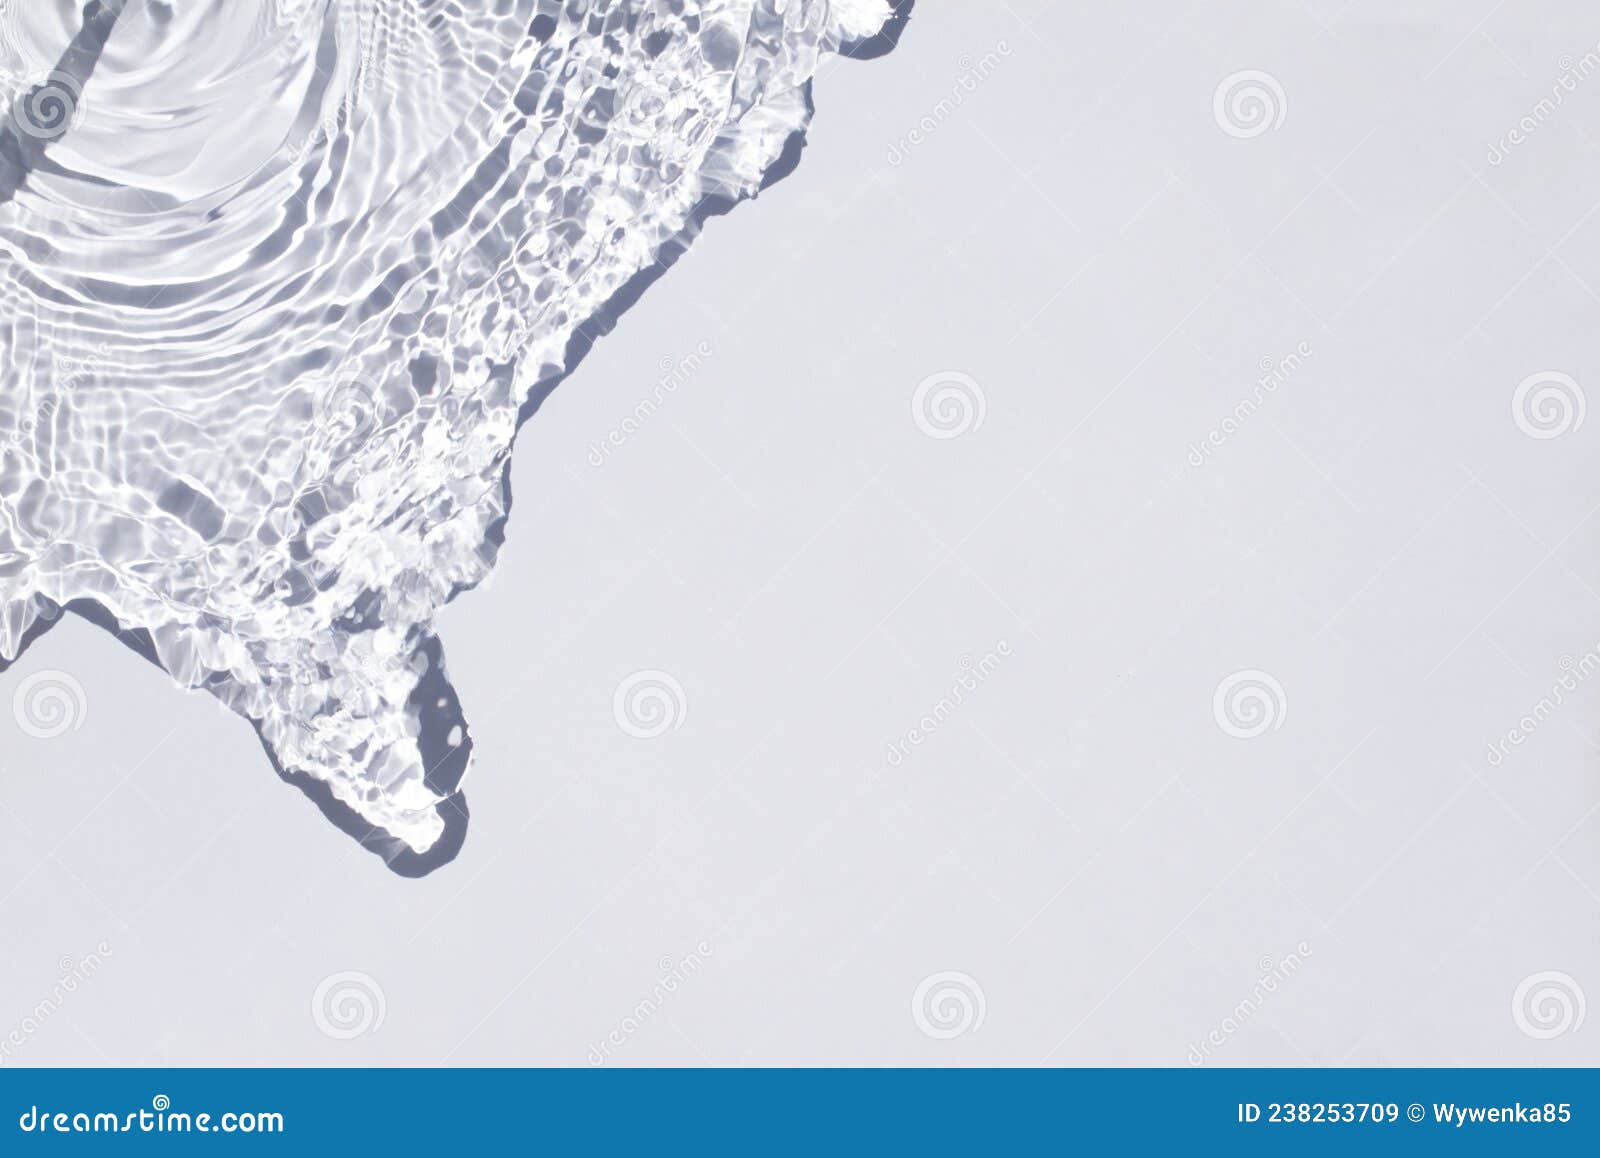 Water Spills on a Light Blue Background. Natural Sunlight and Shade ...